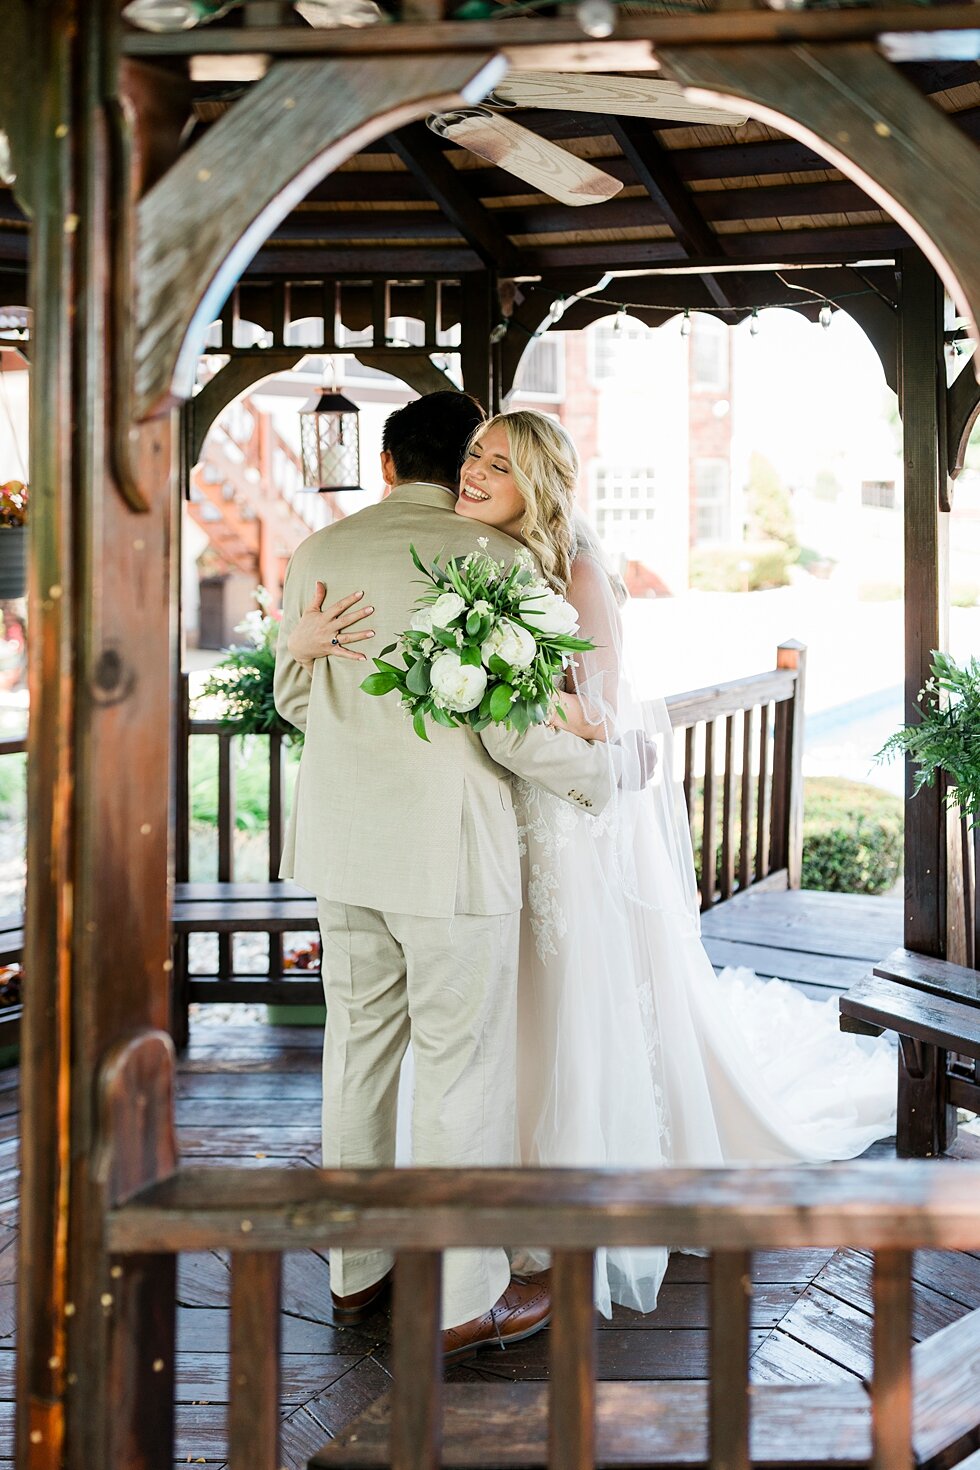  Hugging under the gazebo as this couple ties the knot. Romantic casual lace wedding gown close friends neutral colors background wedding natural greenery crisp white #midwestphotographer #kywedding #louisville #kentuckywedding #louisvillekyweddingph